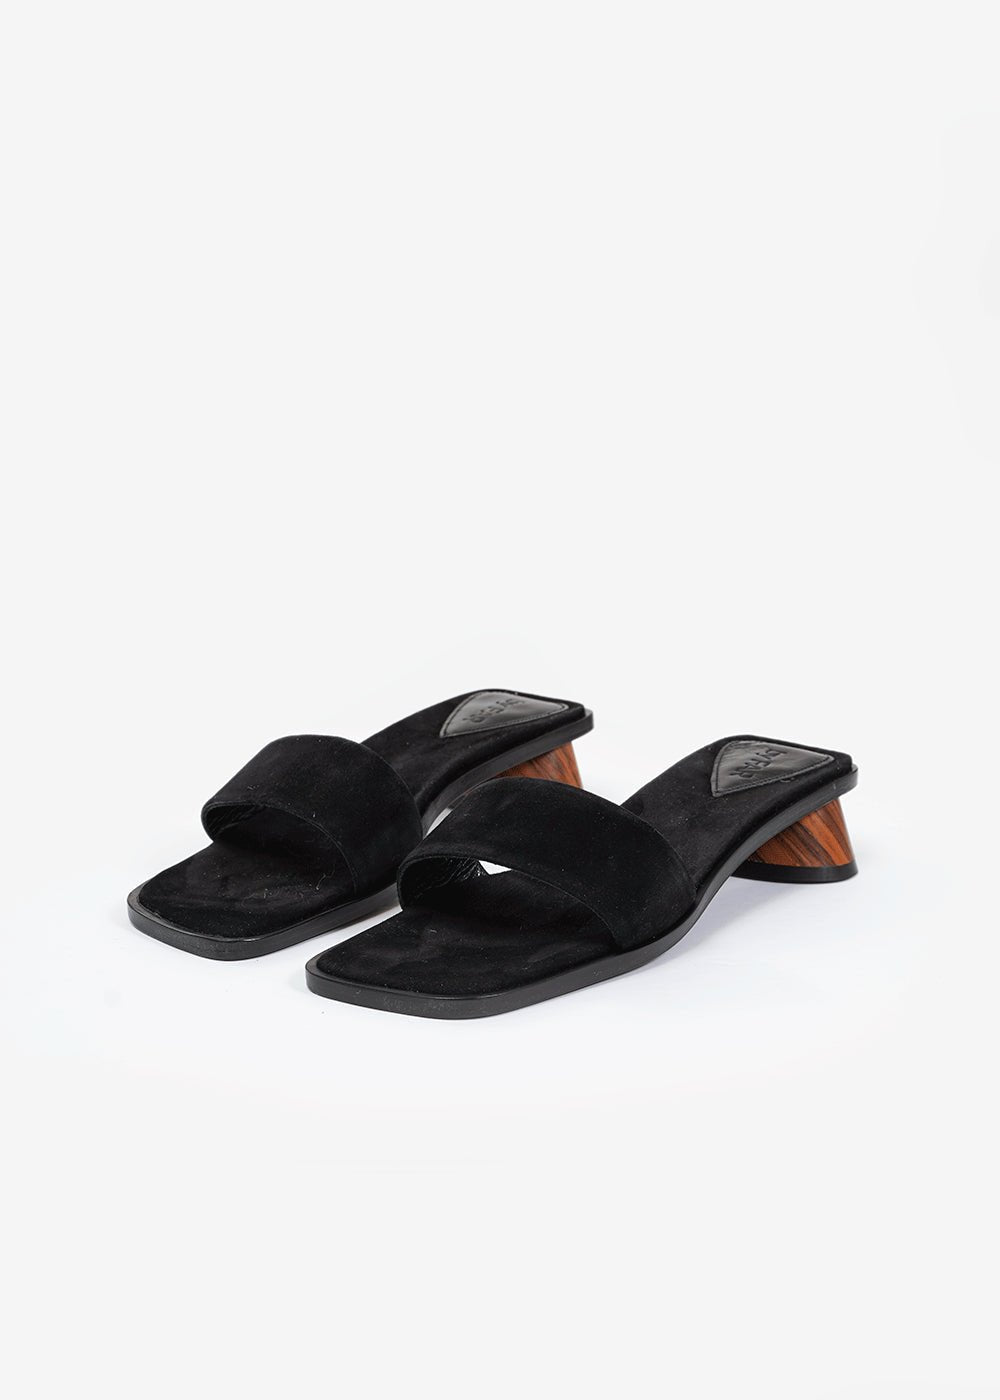 BY FAR Black Suede Sonia Mule - New Classics Studios Sustainable Ethical Fashion Canada